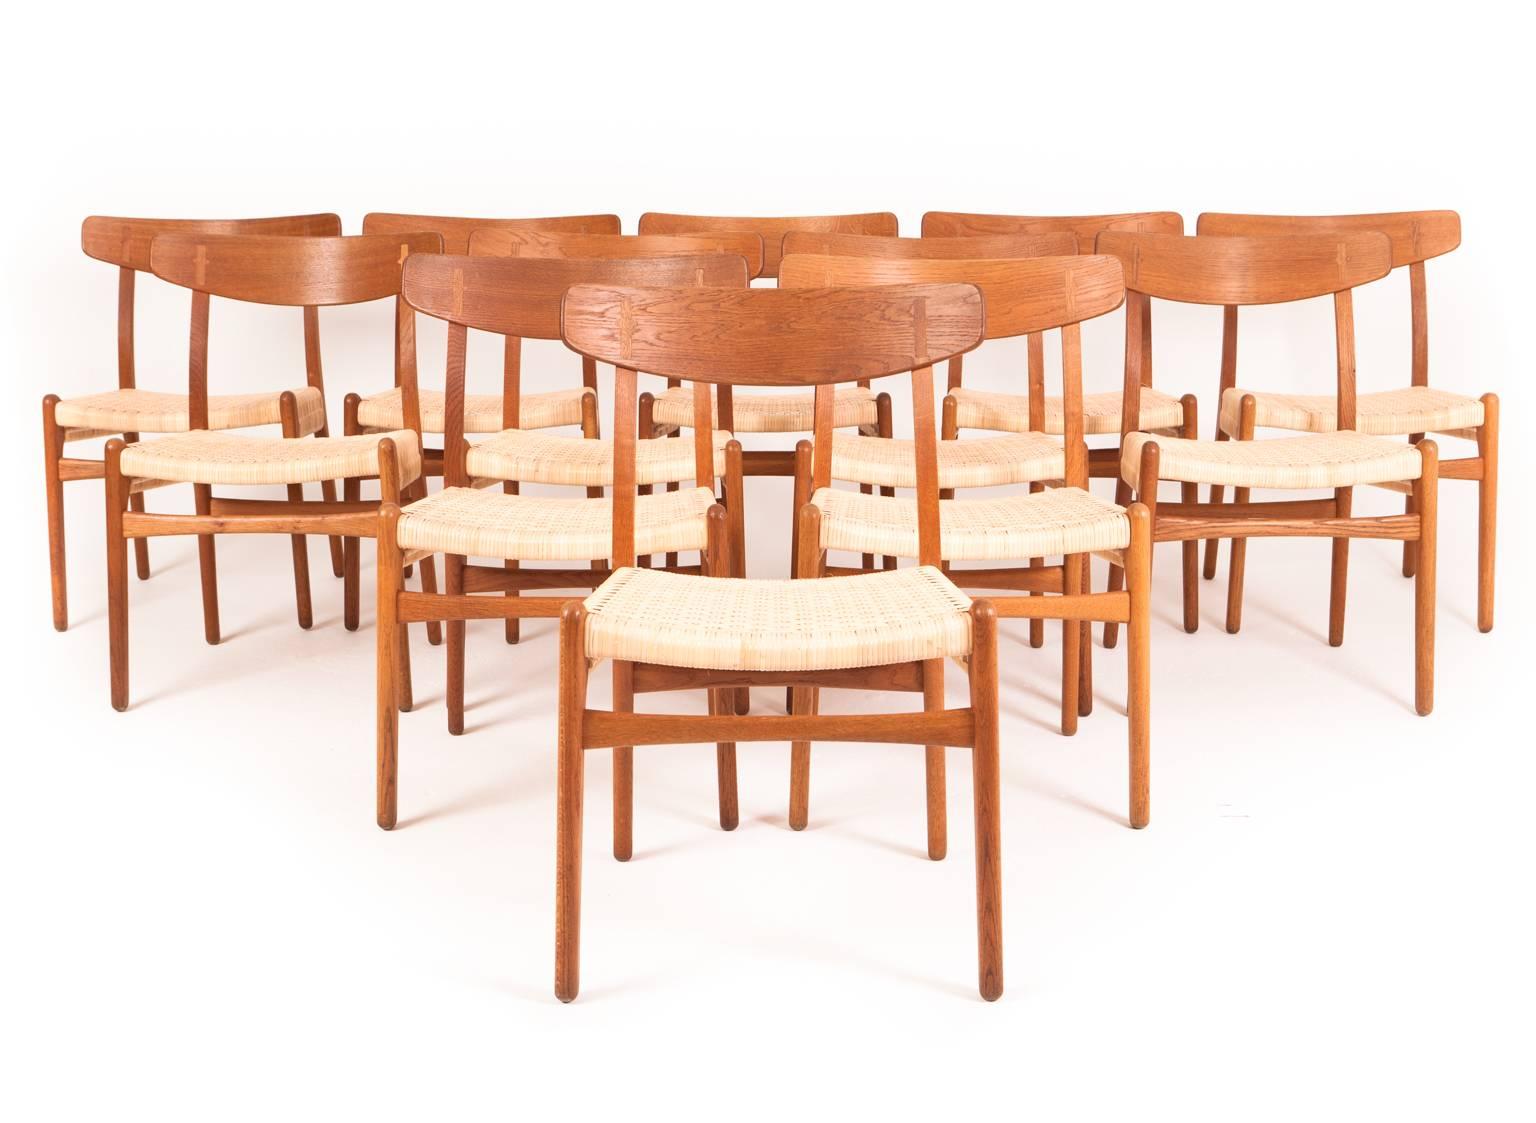 Hans J. Wegner

Model CH 23 

Set of 12 oak chairs, seats with woven cane. 

Designed 1950
Manufactured by Carl Hansen & Son, Odense.